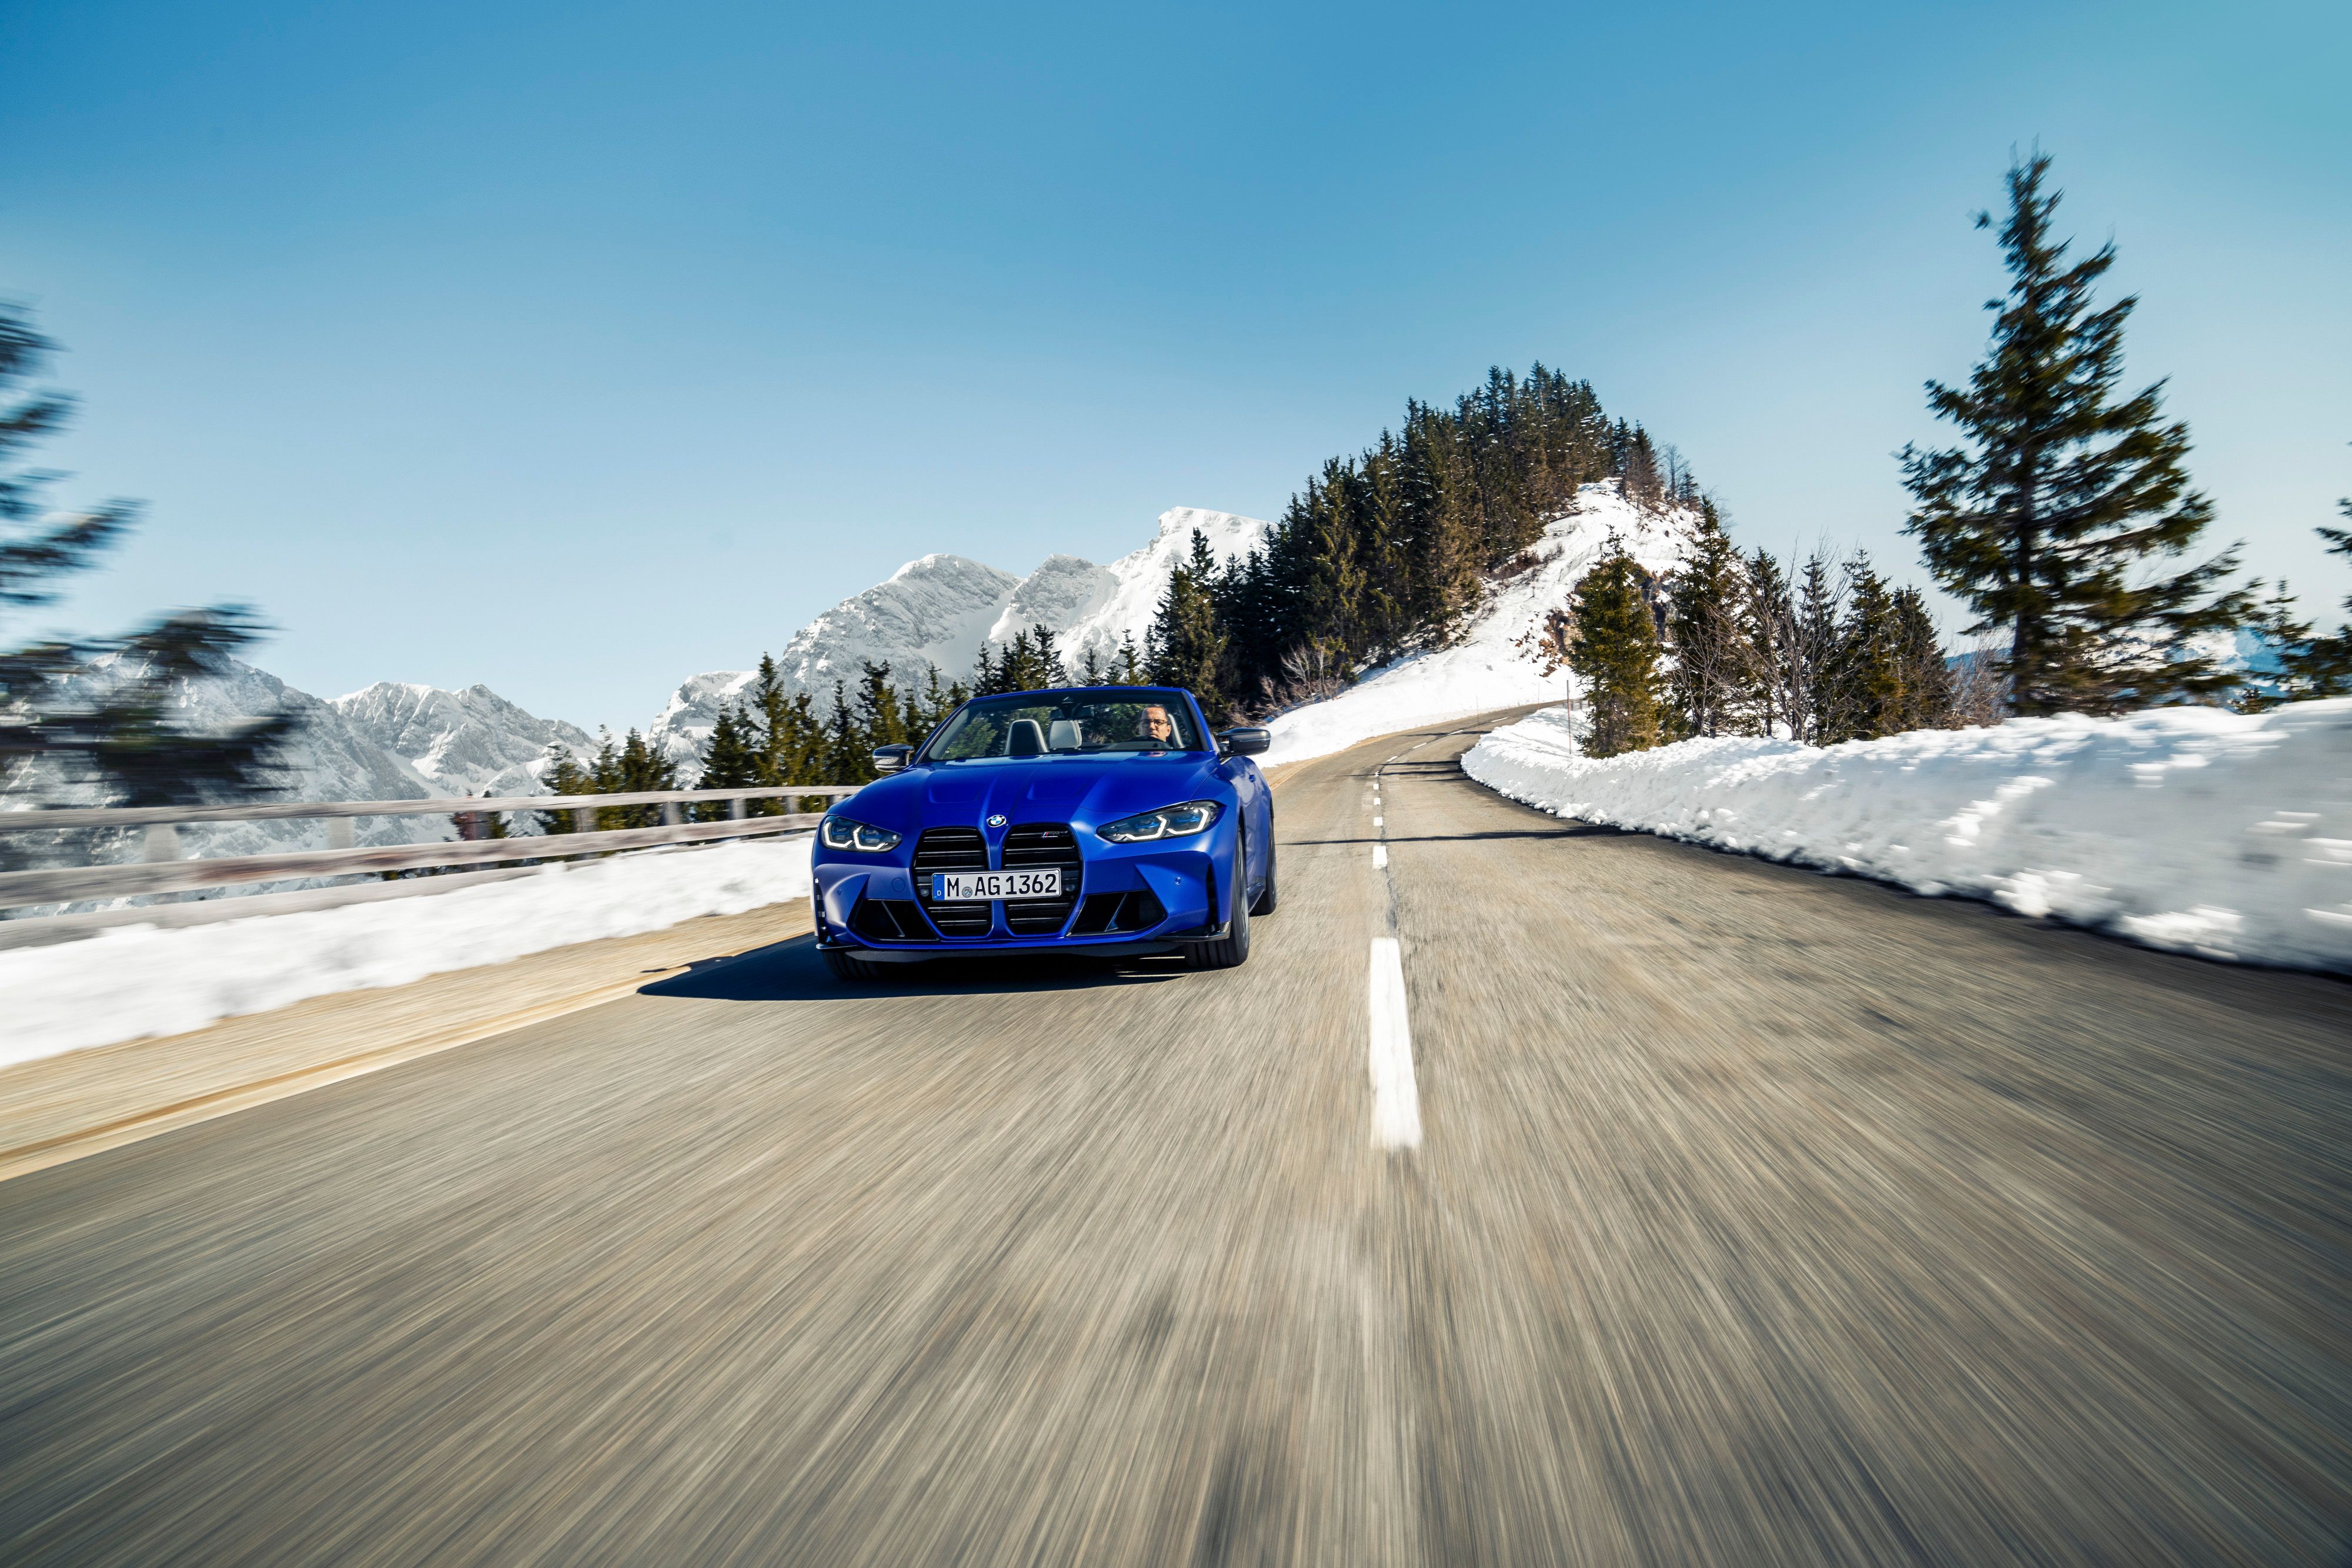 2022 BMW M4 Competition Convertible M xDrive